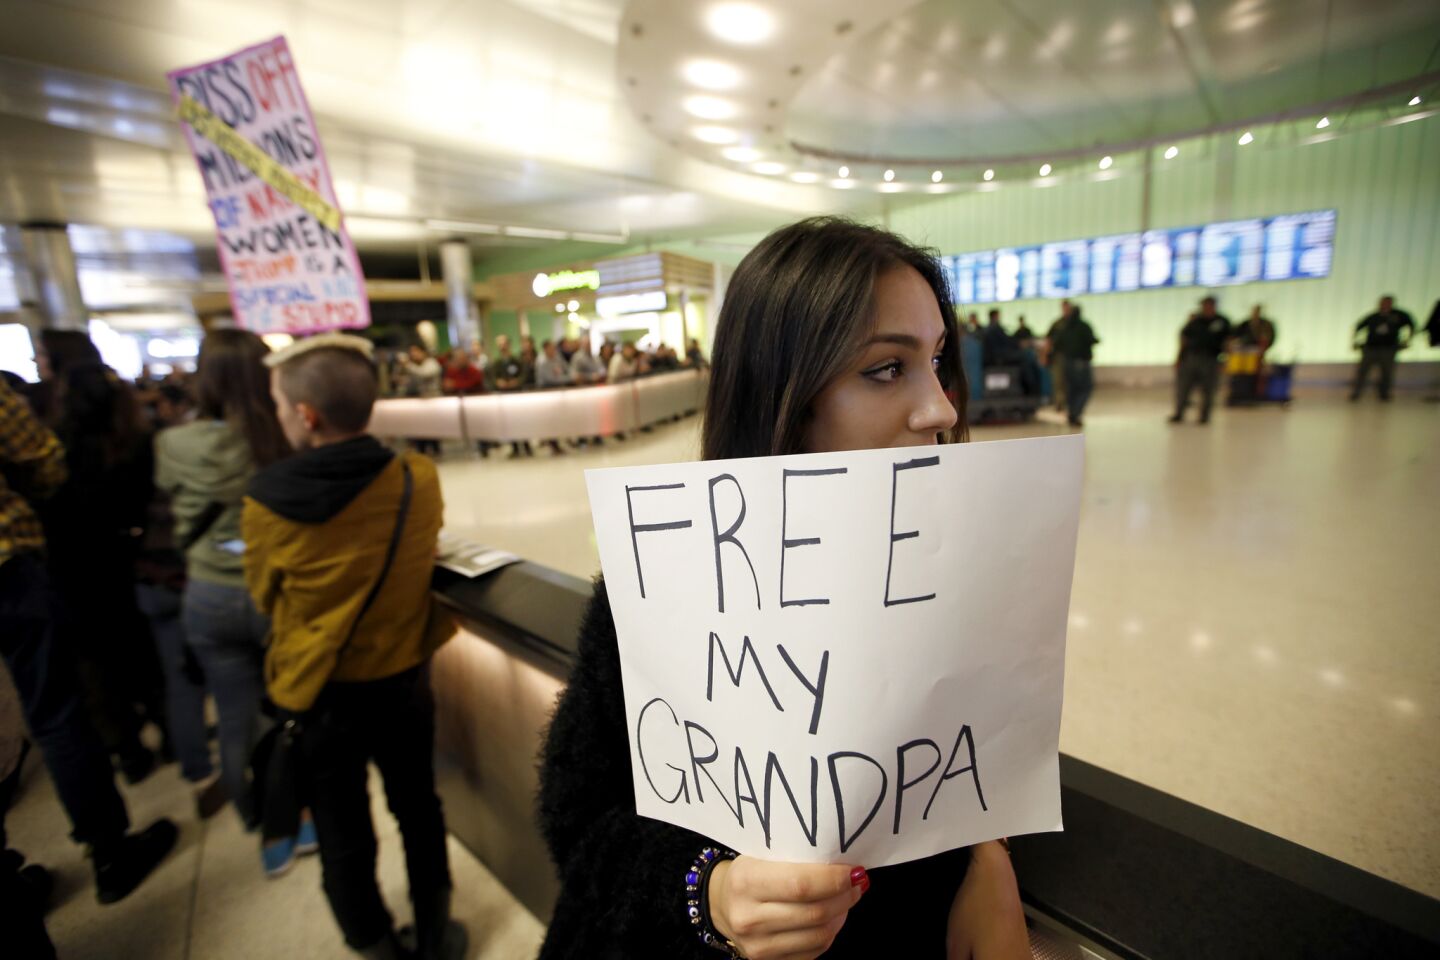 Kamryn Taghizadeh, 18, holds up a sign Saturday night as she waits for grandfather Reza Taghizadeh, 78, a minimalist painter who was detained as he arrived at Tom Bradley International Terminal from Iran. The artist and green-card holder was later released.